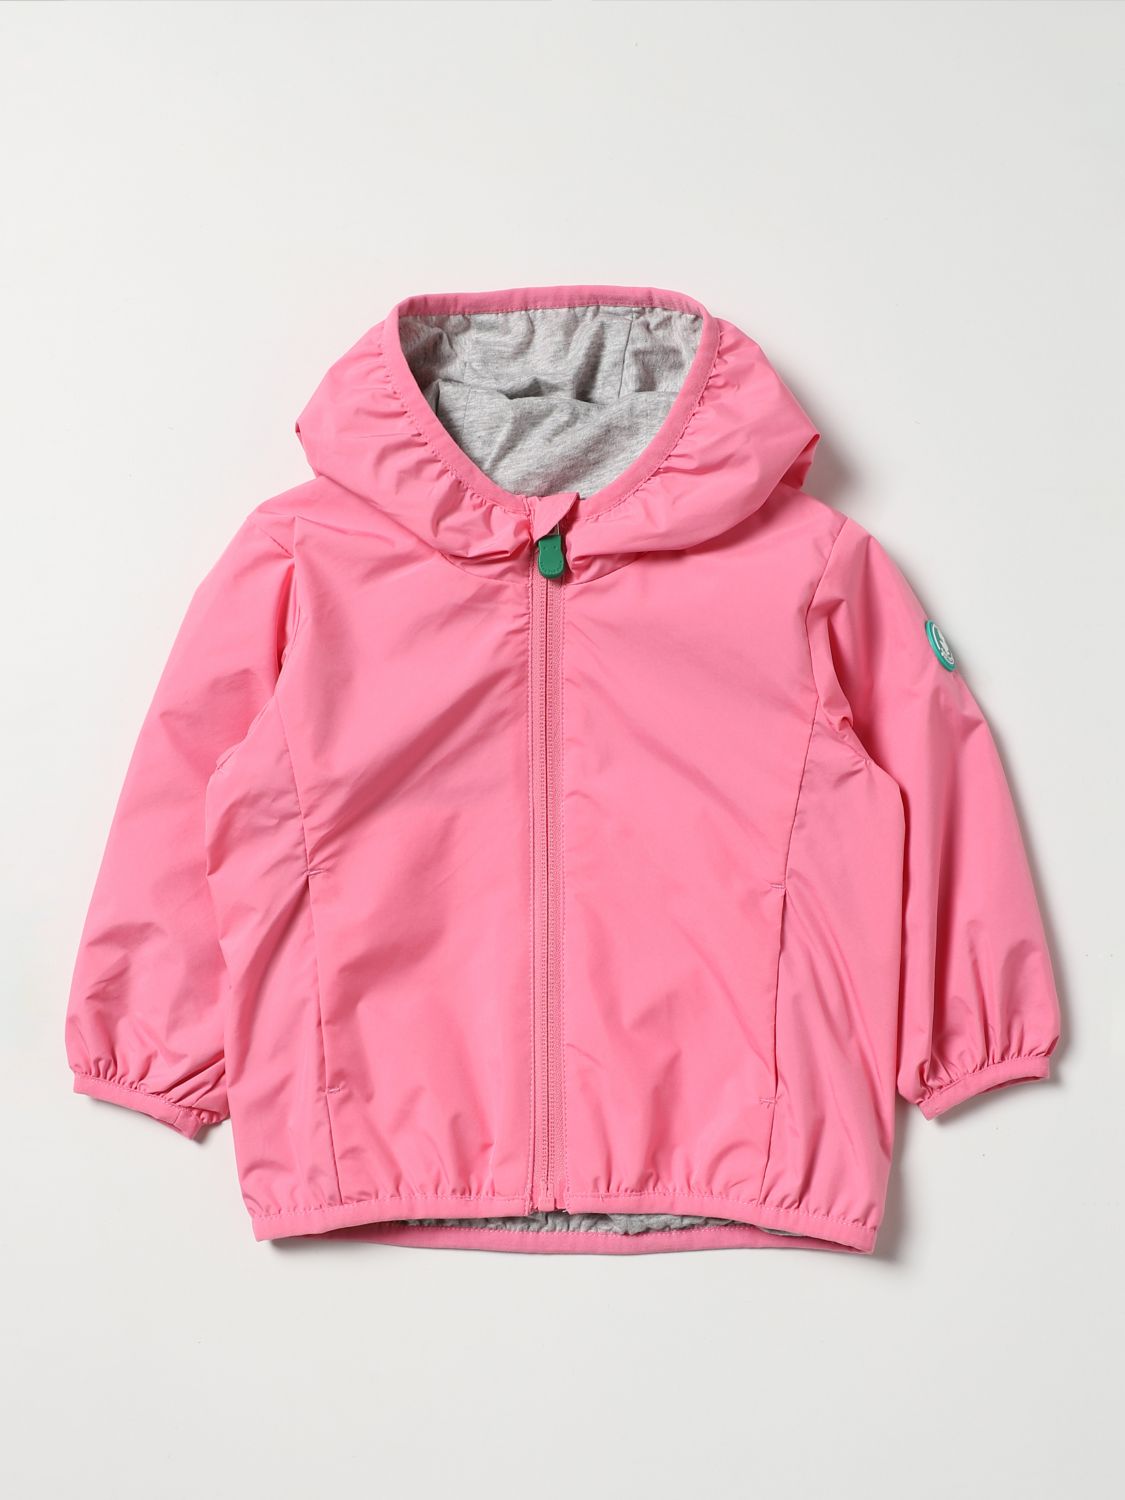 Jacket Save The Duck: Jacket kids Save The Duck pink 1